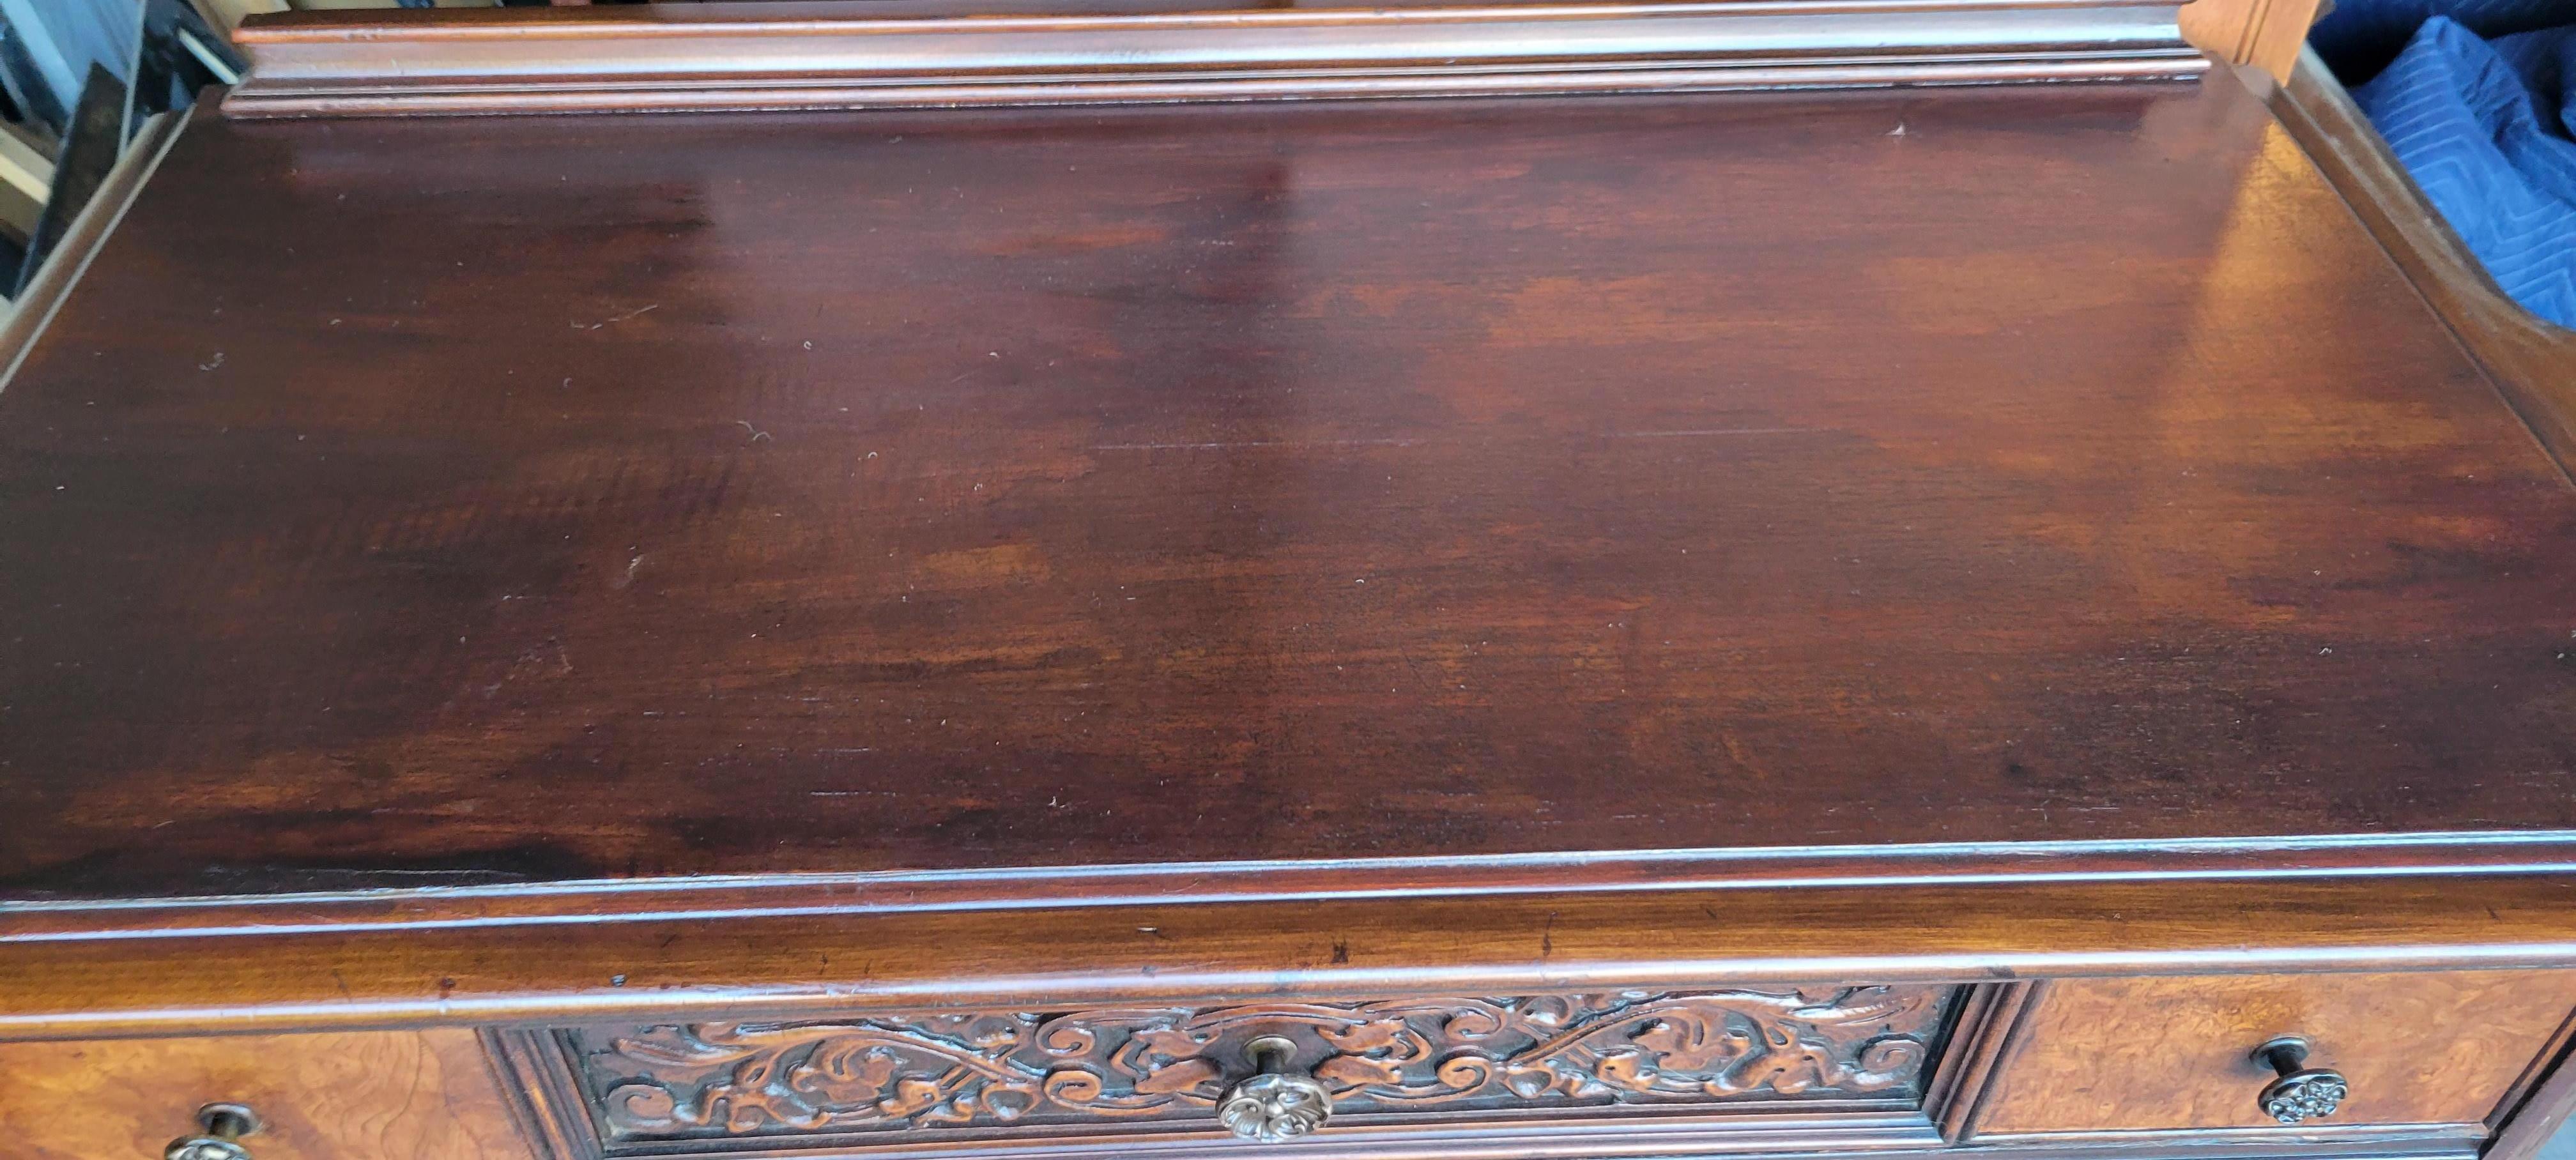 Antique carved walnut - mahogany dresser: 51 inches tall, 38 inches wide and about 19 inches deep. The dresser has 5 drawers, all with the original hardware. 
The dresser is constructed with solid wood and decorated with veneer. 
The drawers have